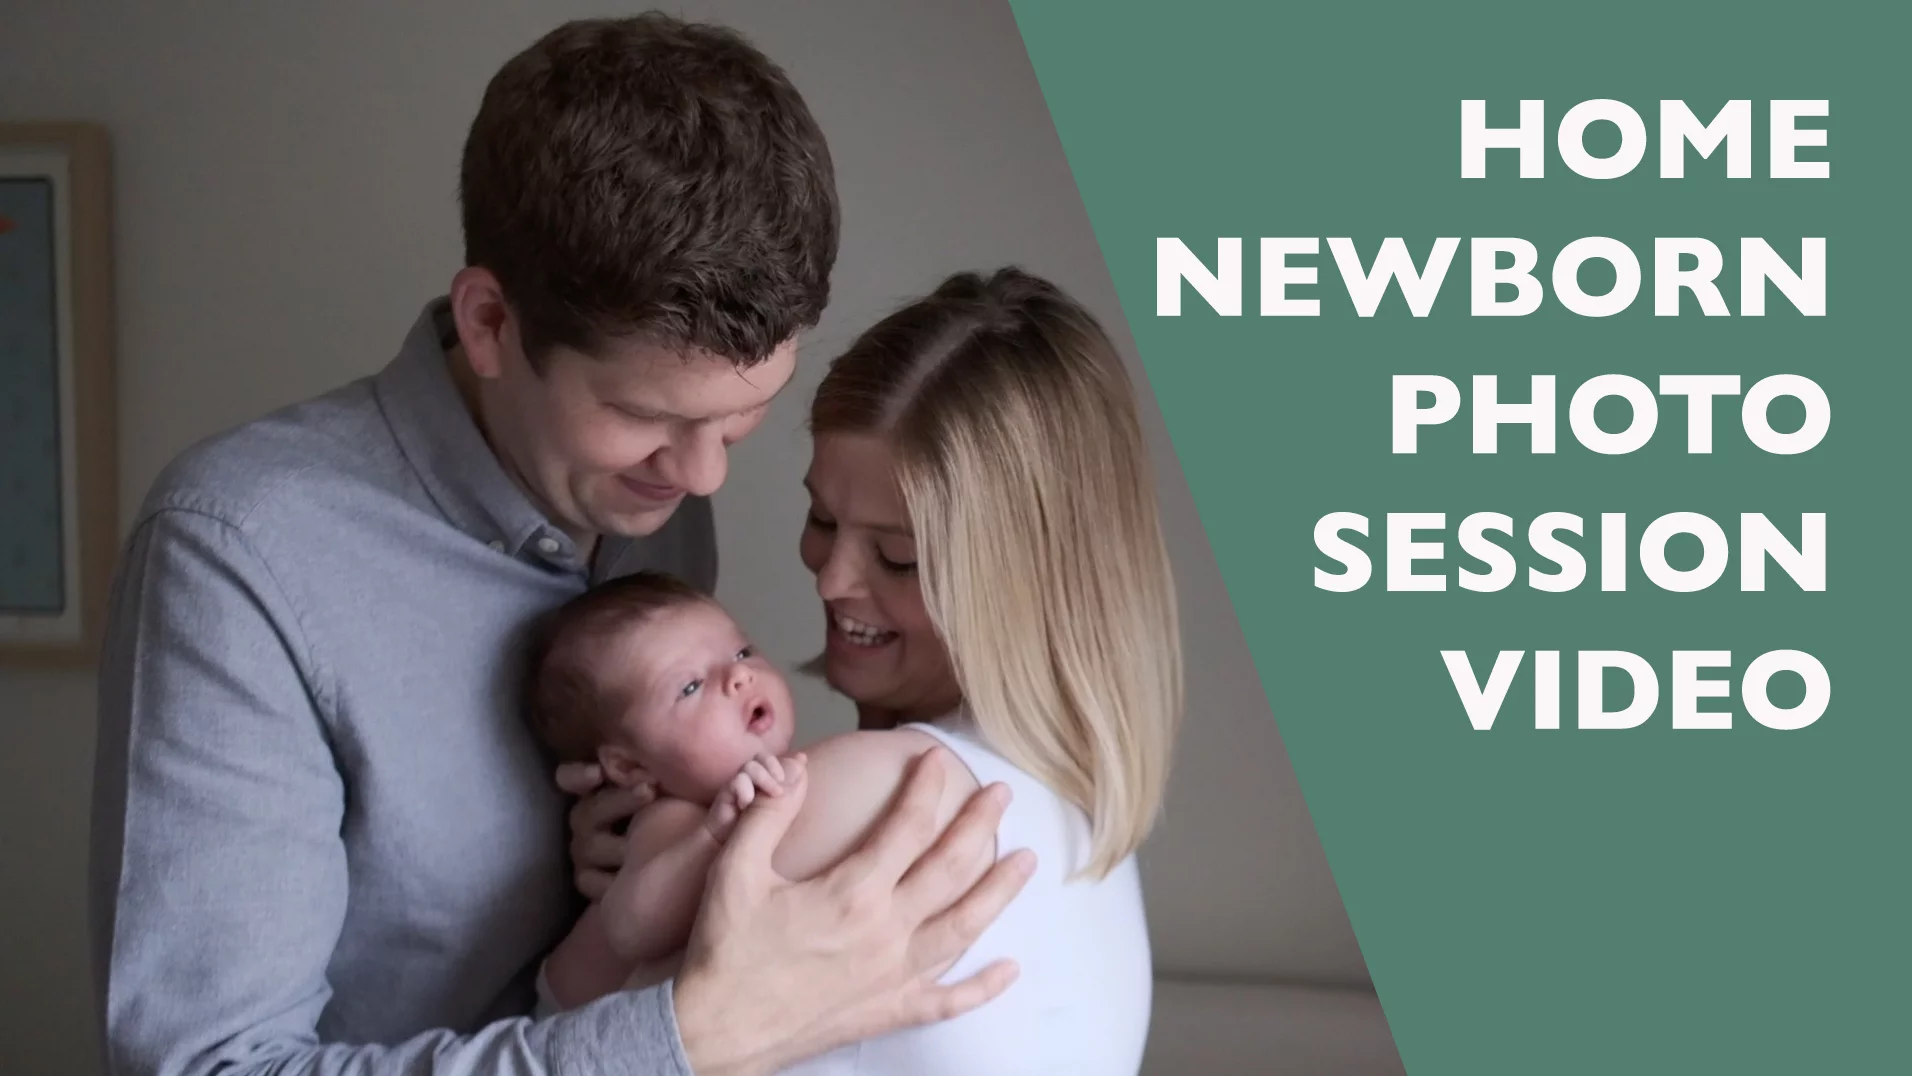 Video for home newborn photo session